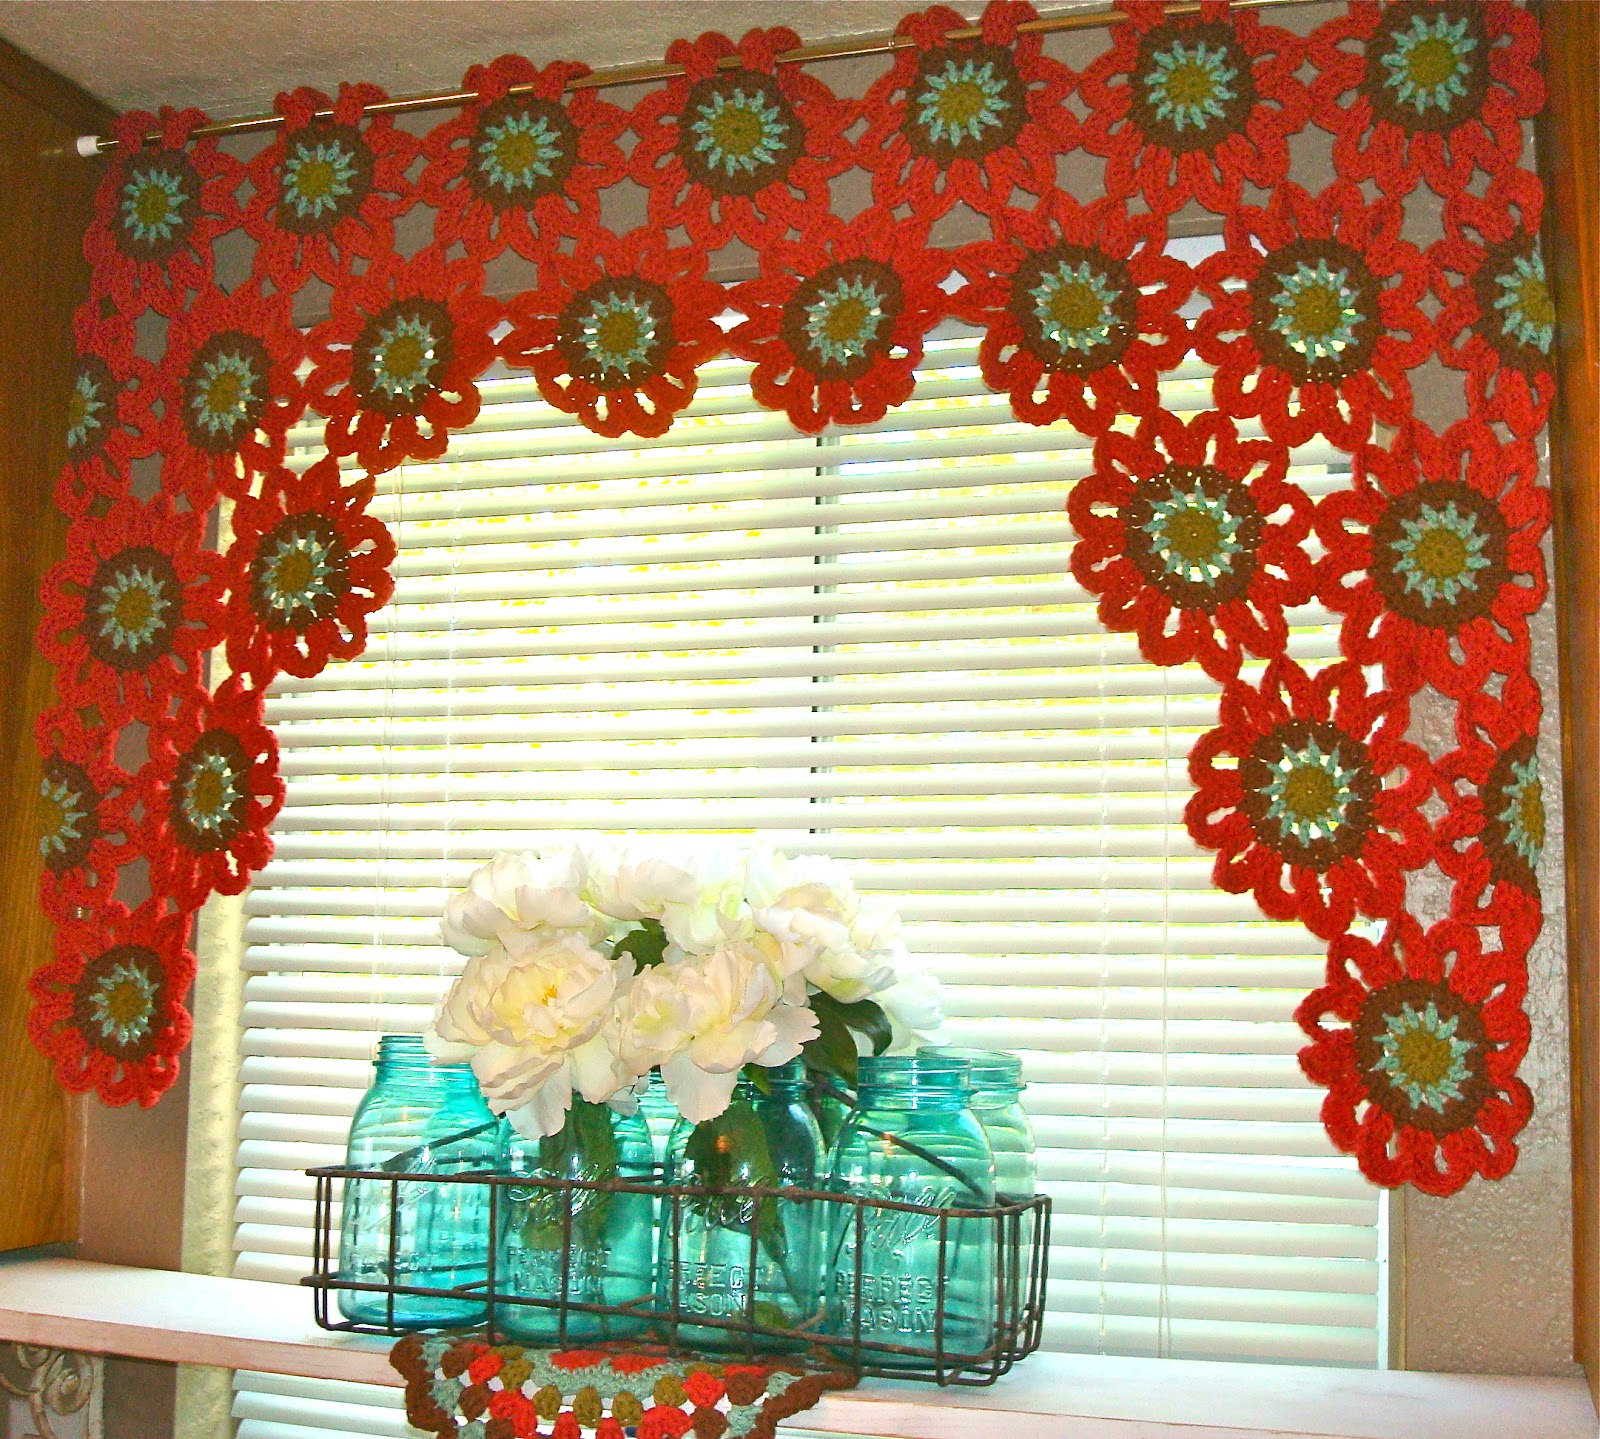 Crochet Door Curtain Pattern 19 Cool Patterns For Crochet Curtains Guide Patterns